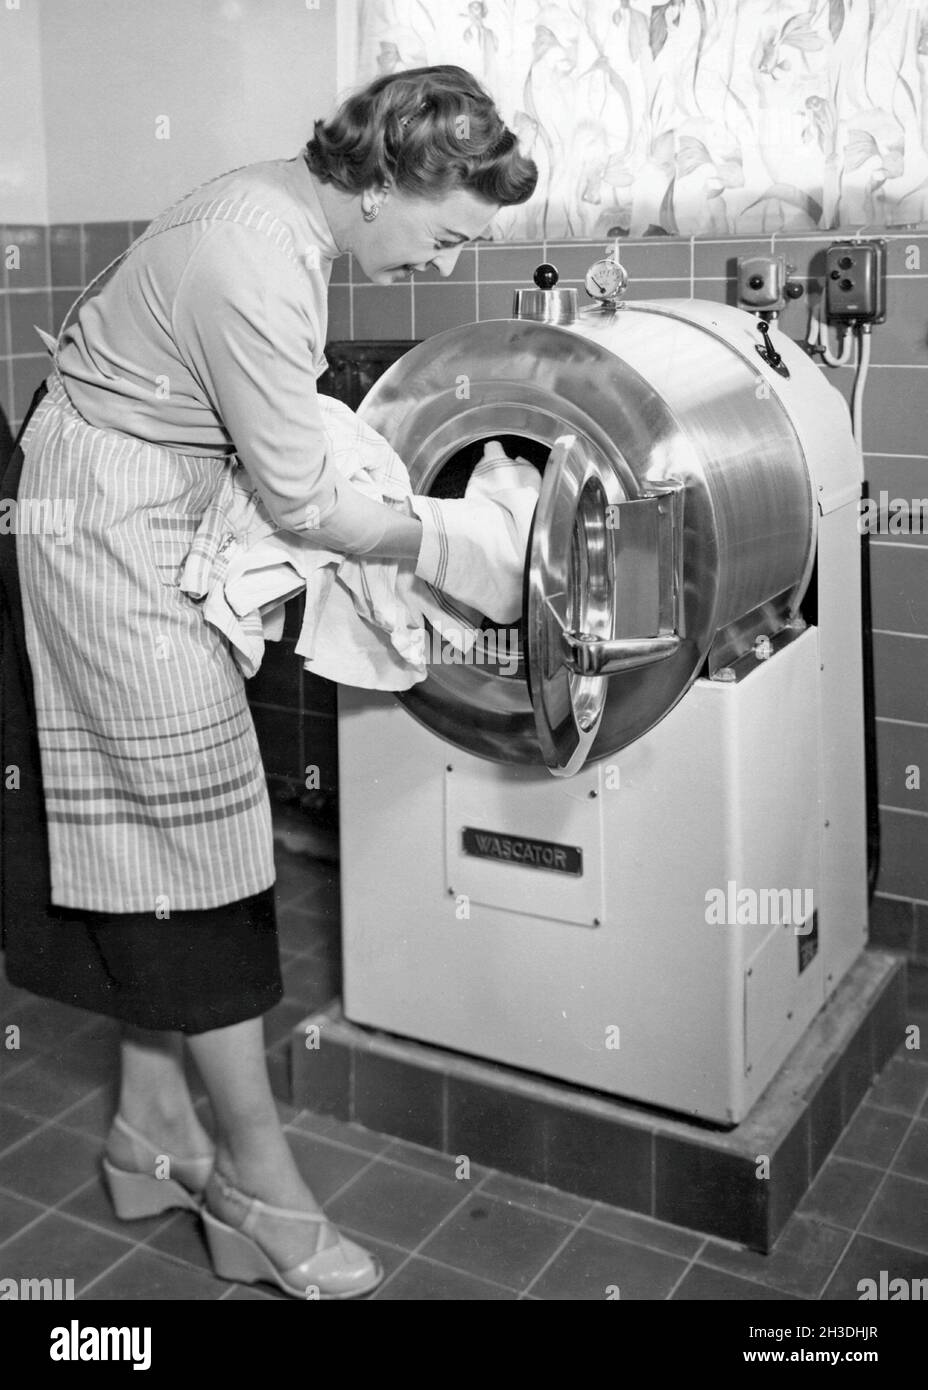 Doing the laundry in the 1950s. A lady is demonstrating the new washingmachine manufactured by AB Wascator. Stock Photo